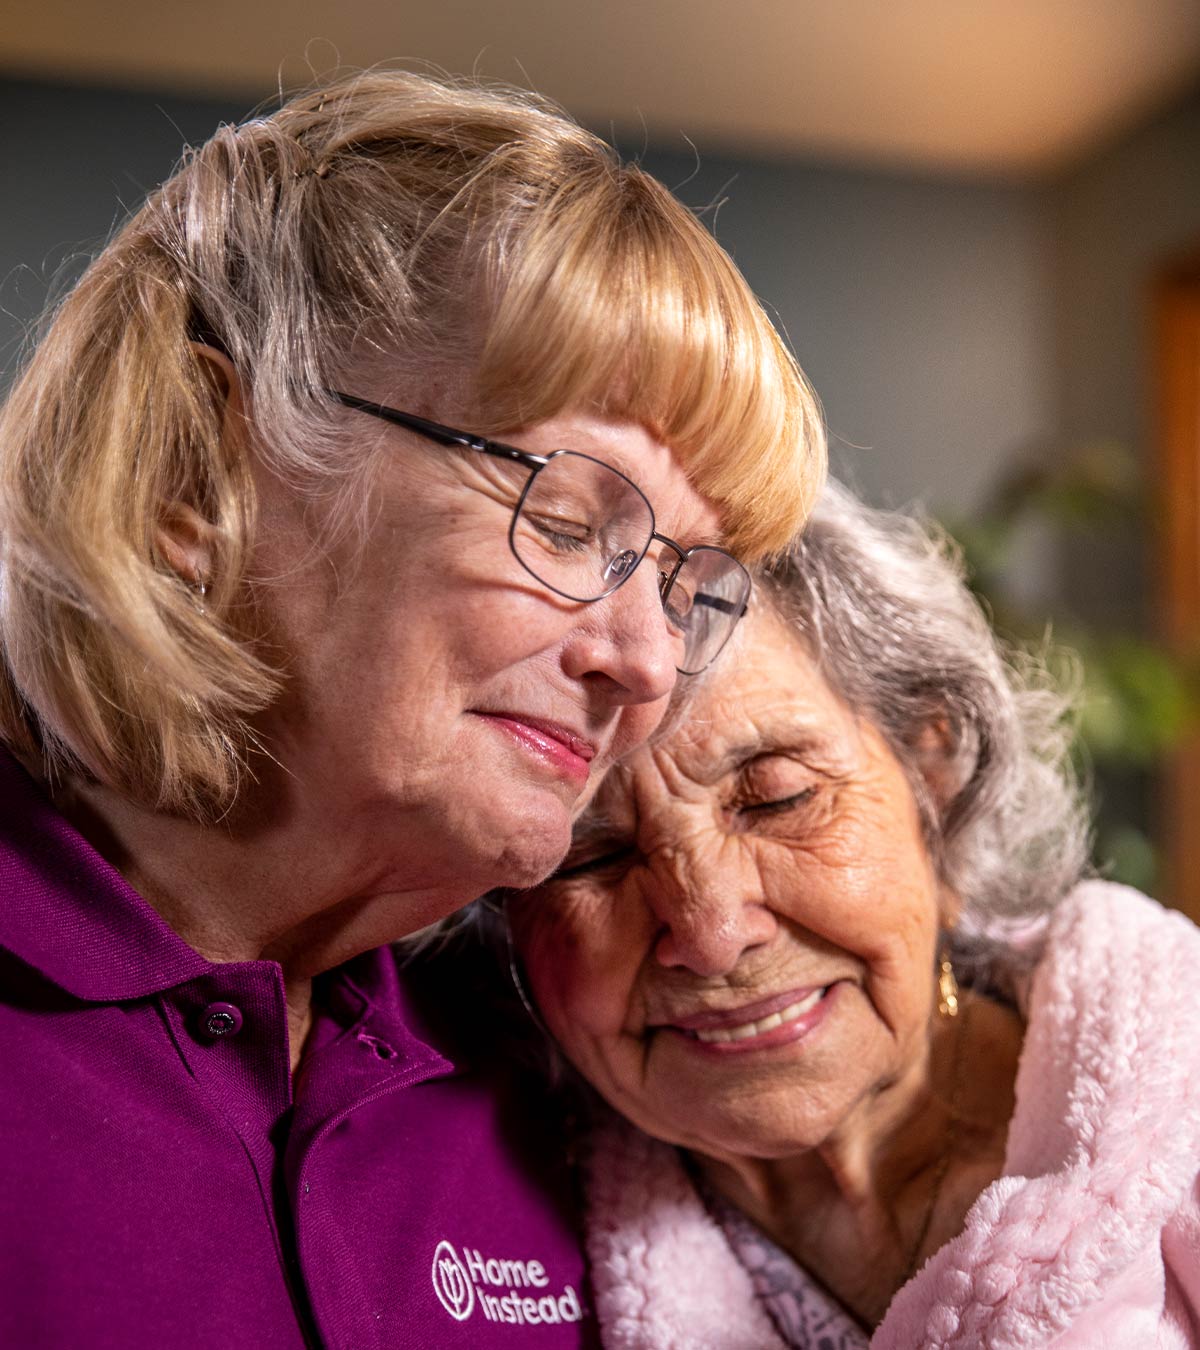 CAREGiver providing in-home senior care services. Home Instead of Barrie, ON provides Elder Care to aging adults. 